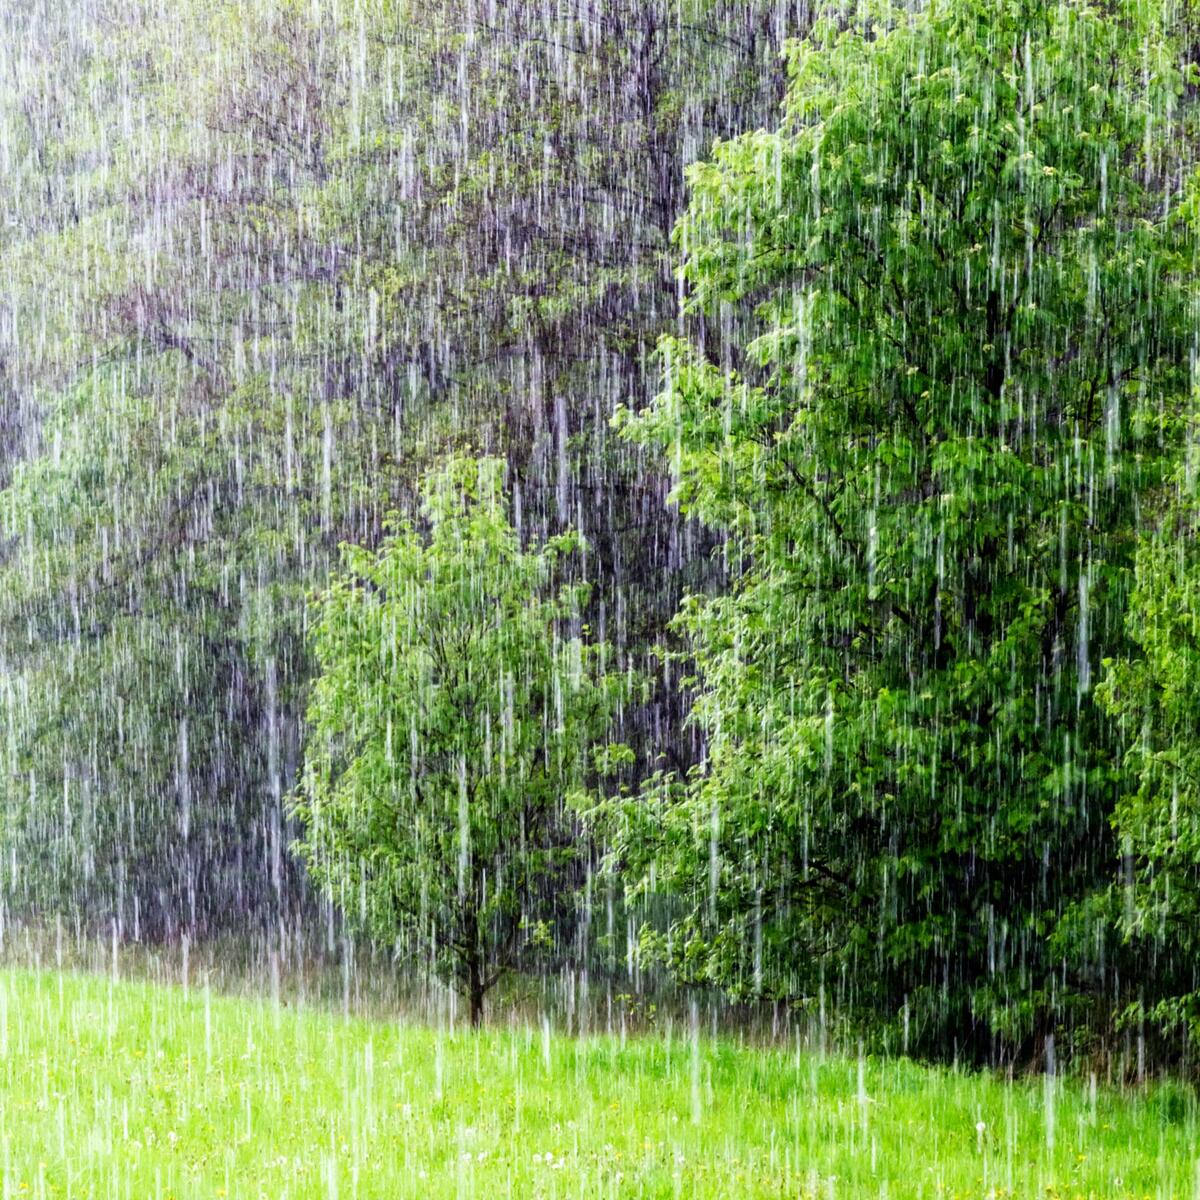 Rain in a summer forest